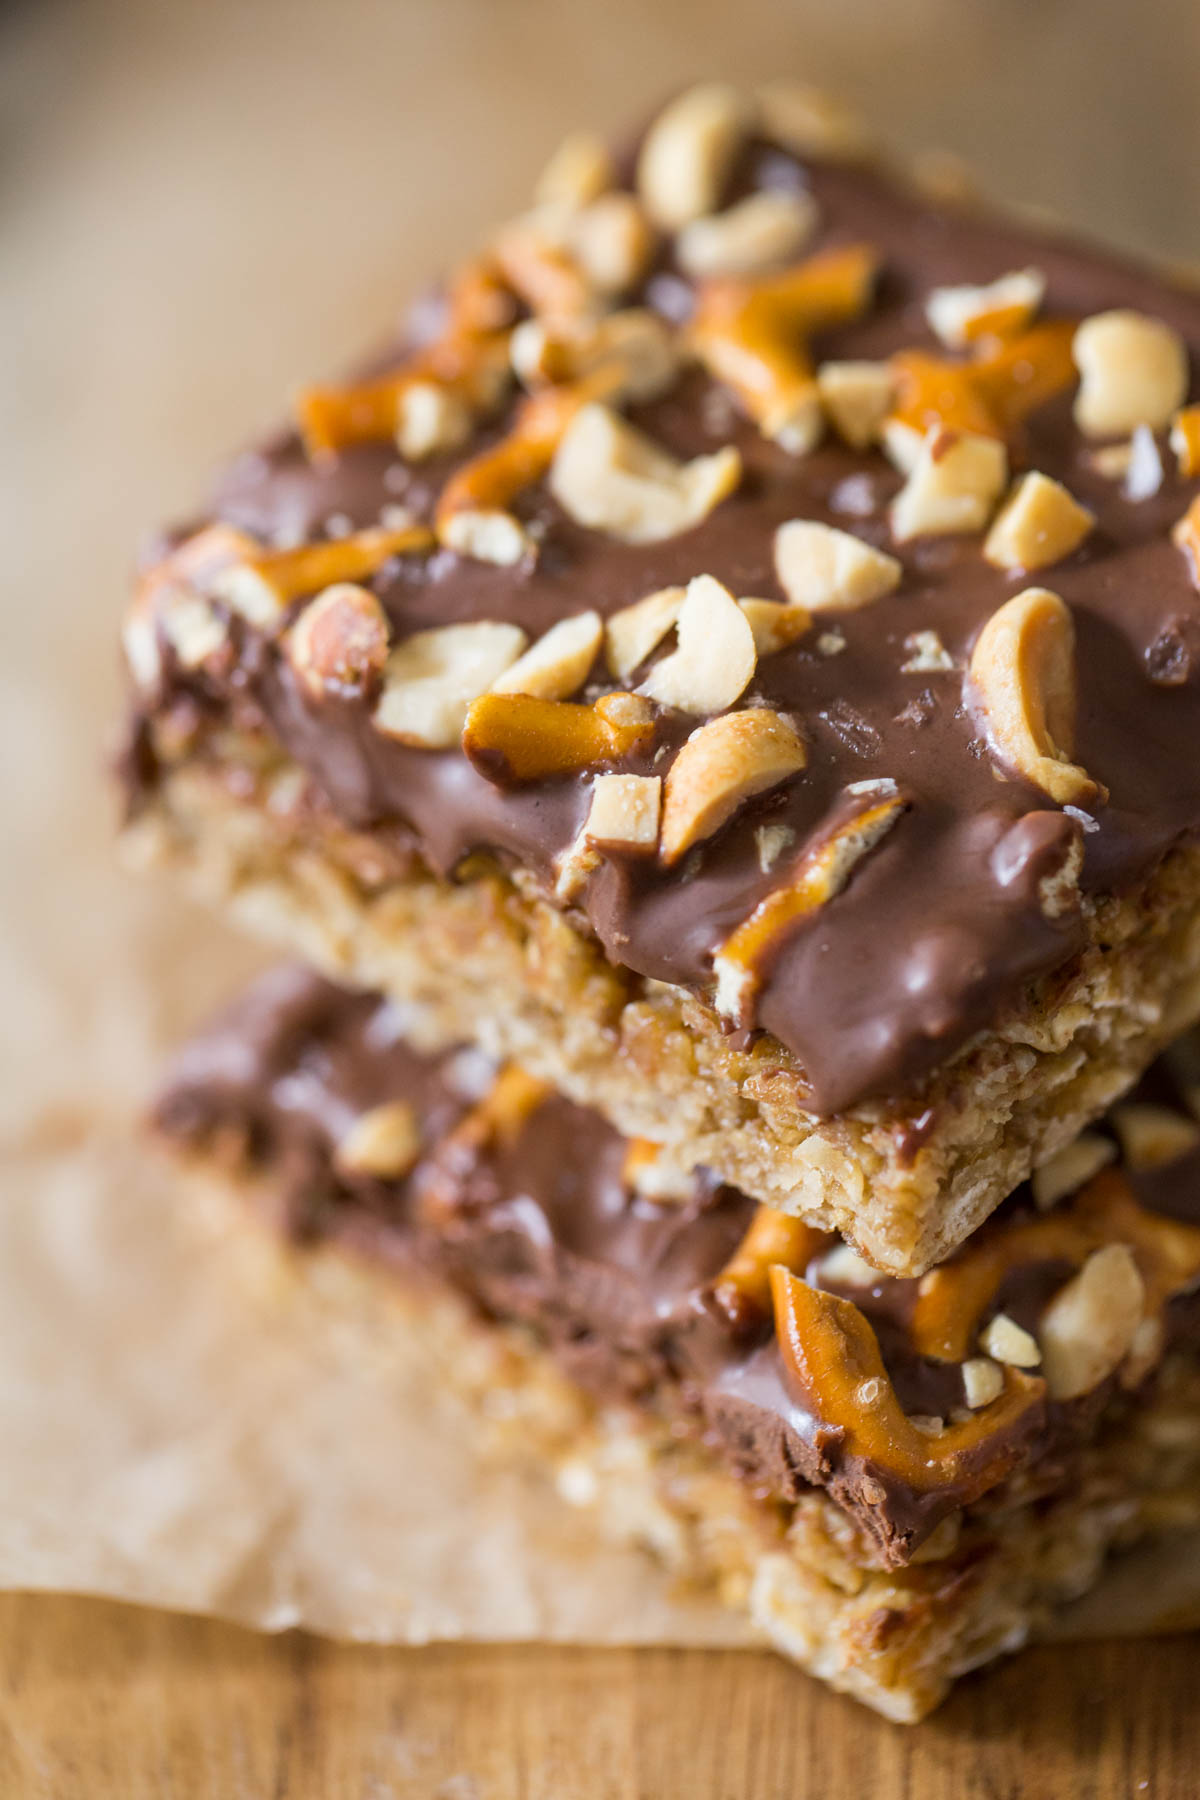 A close up view of the peanut and pretzel toppings on a stack of Oh Henry Bars